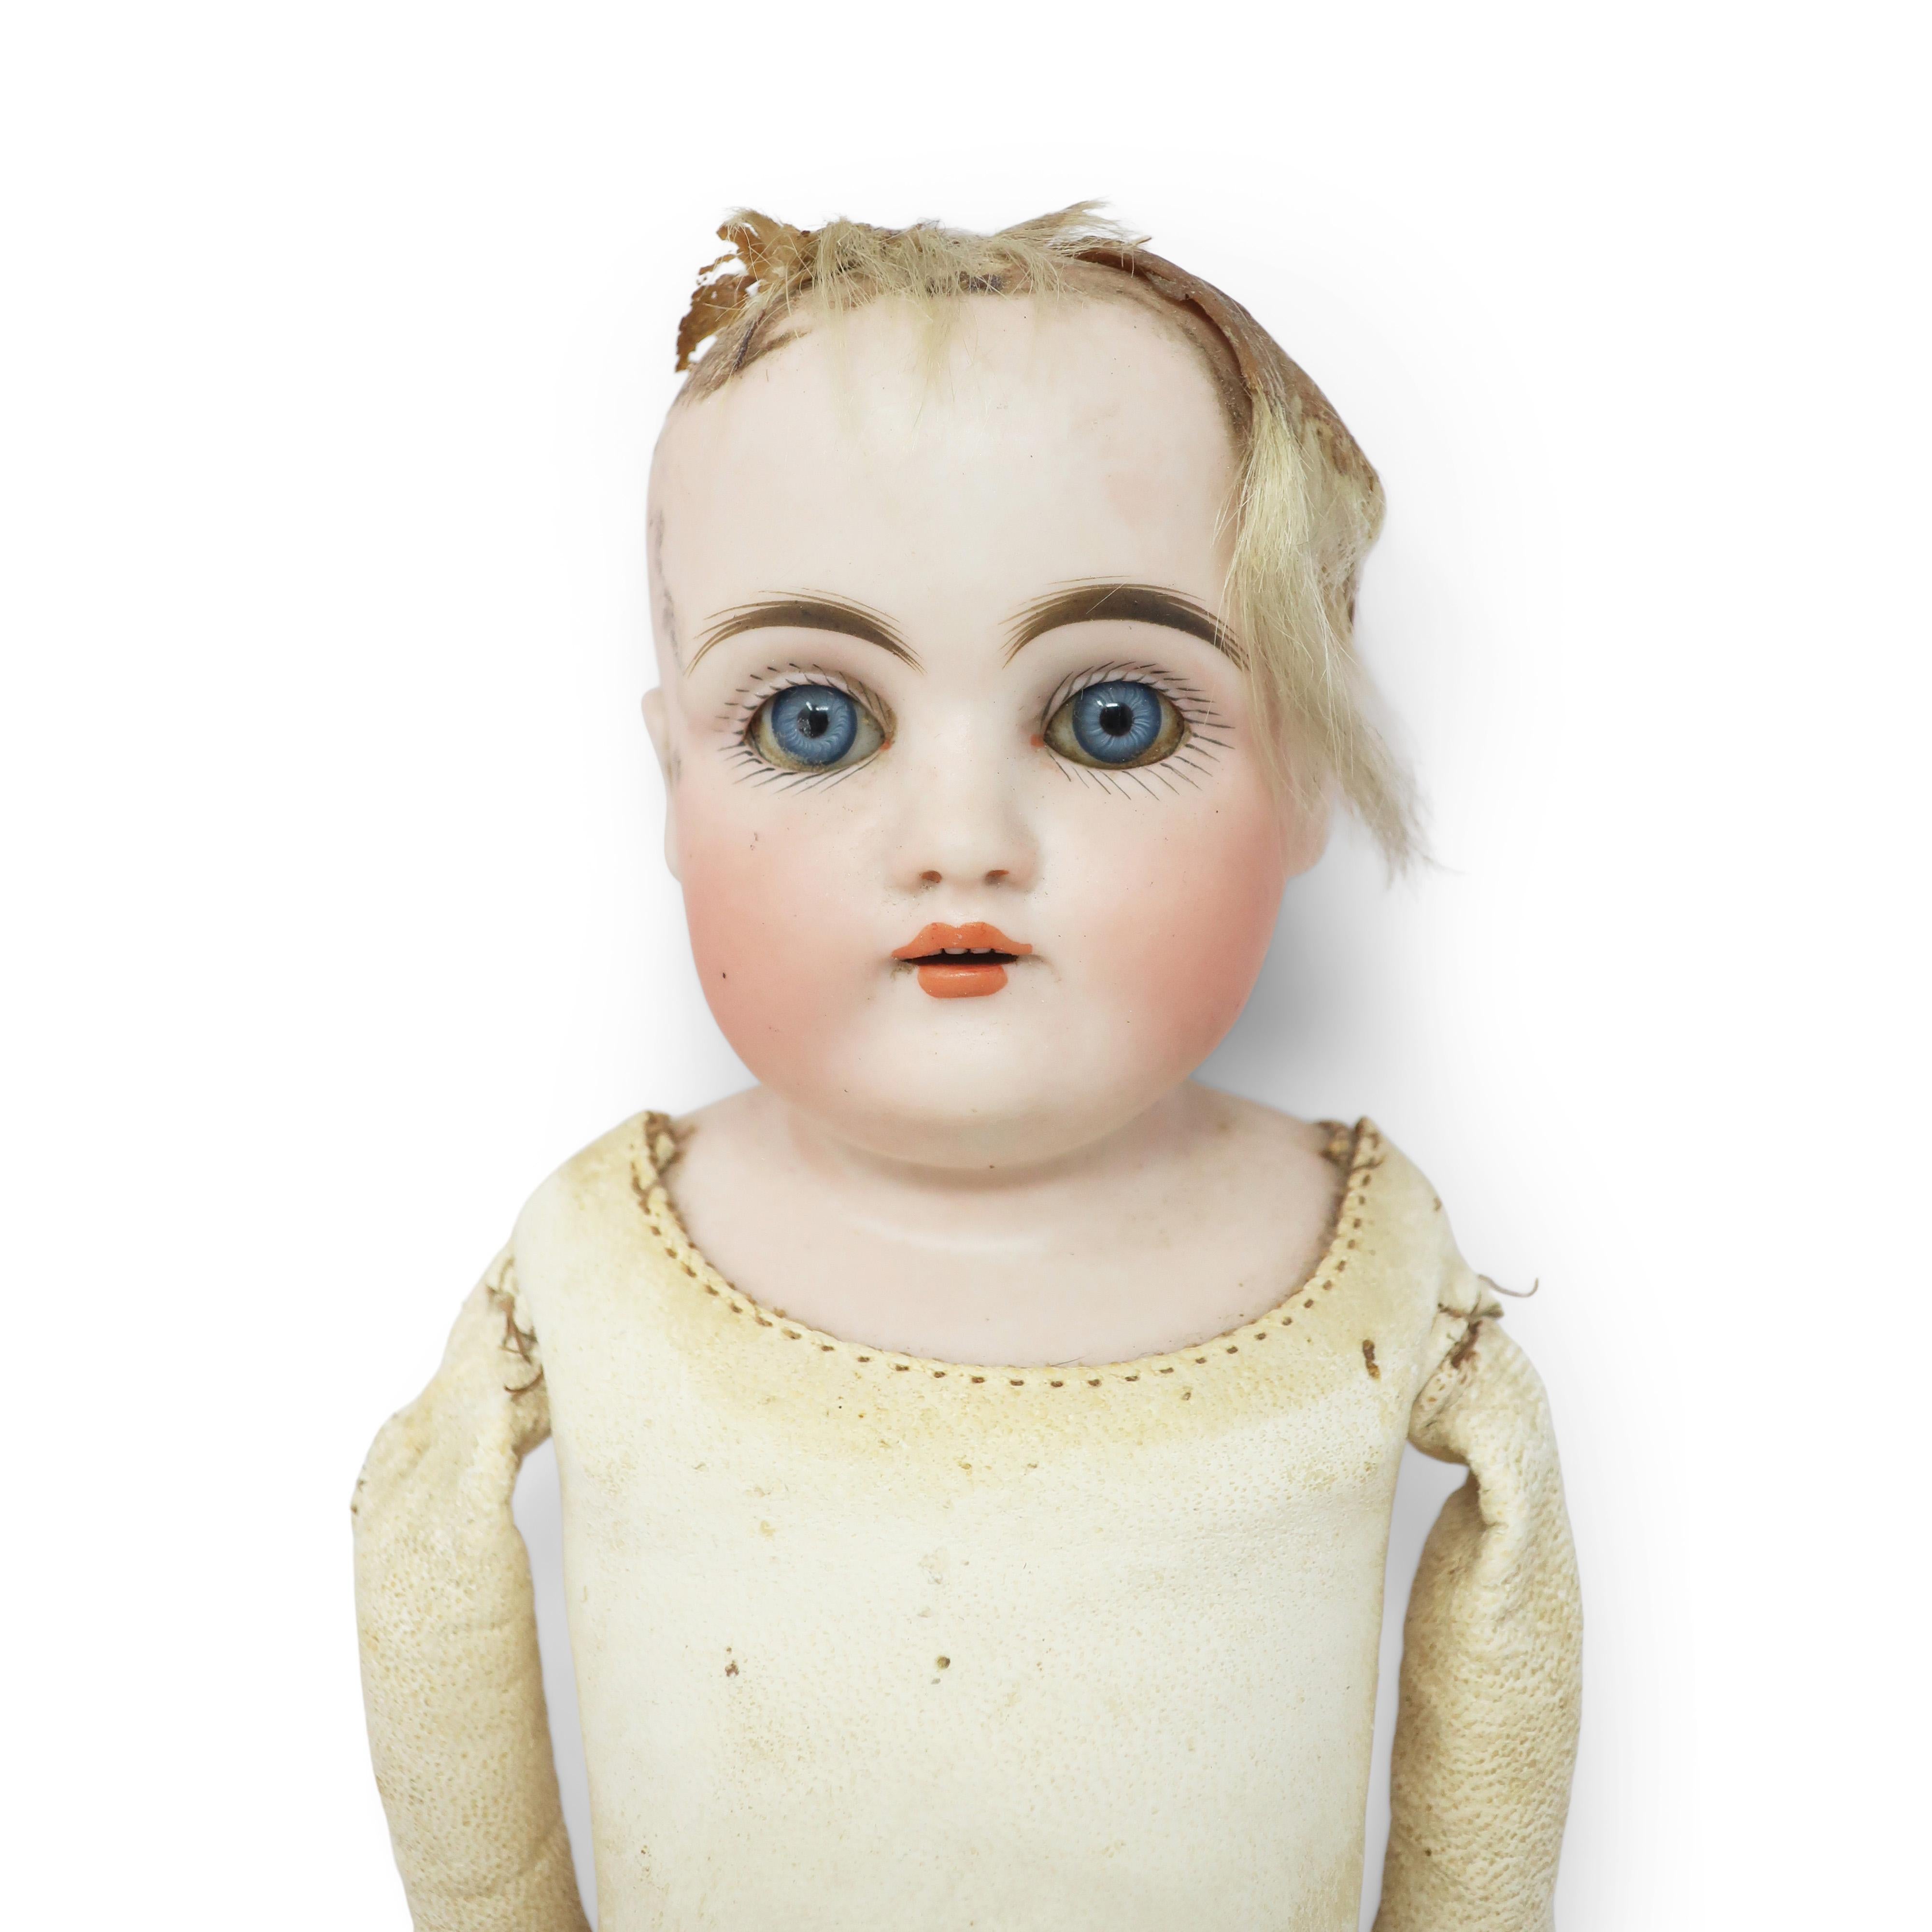 Antique Kestner DEP 154 Bisque Doll with Sleepy Eyes from Germany 4